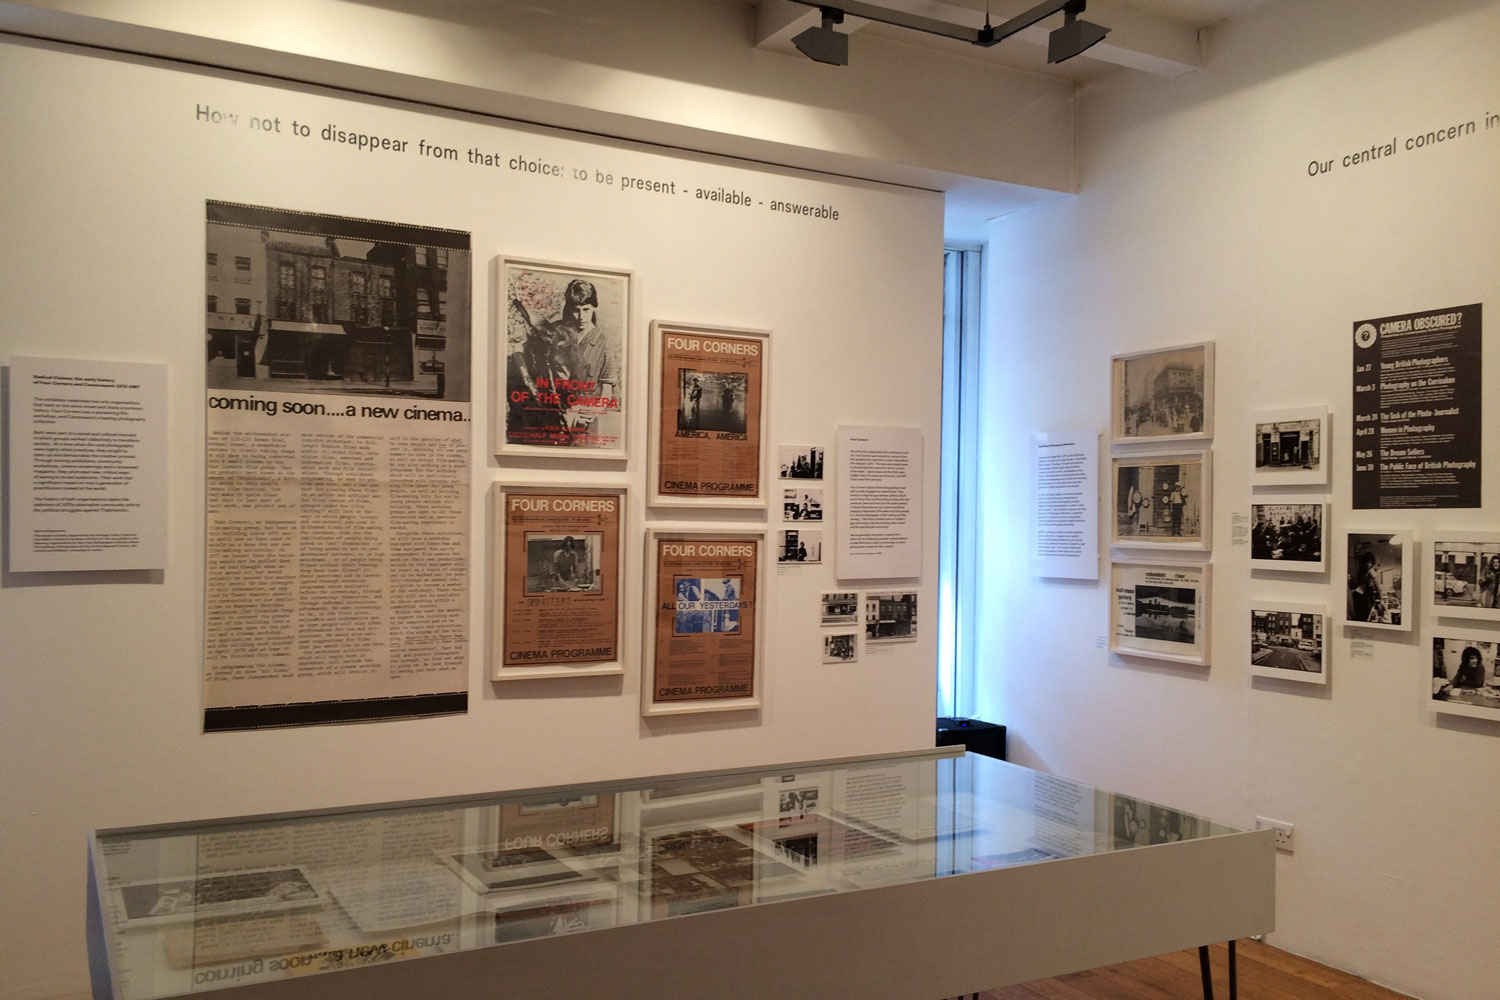 A more detailed photograph of the exhibition showing posters from a distance